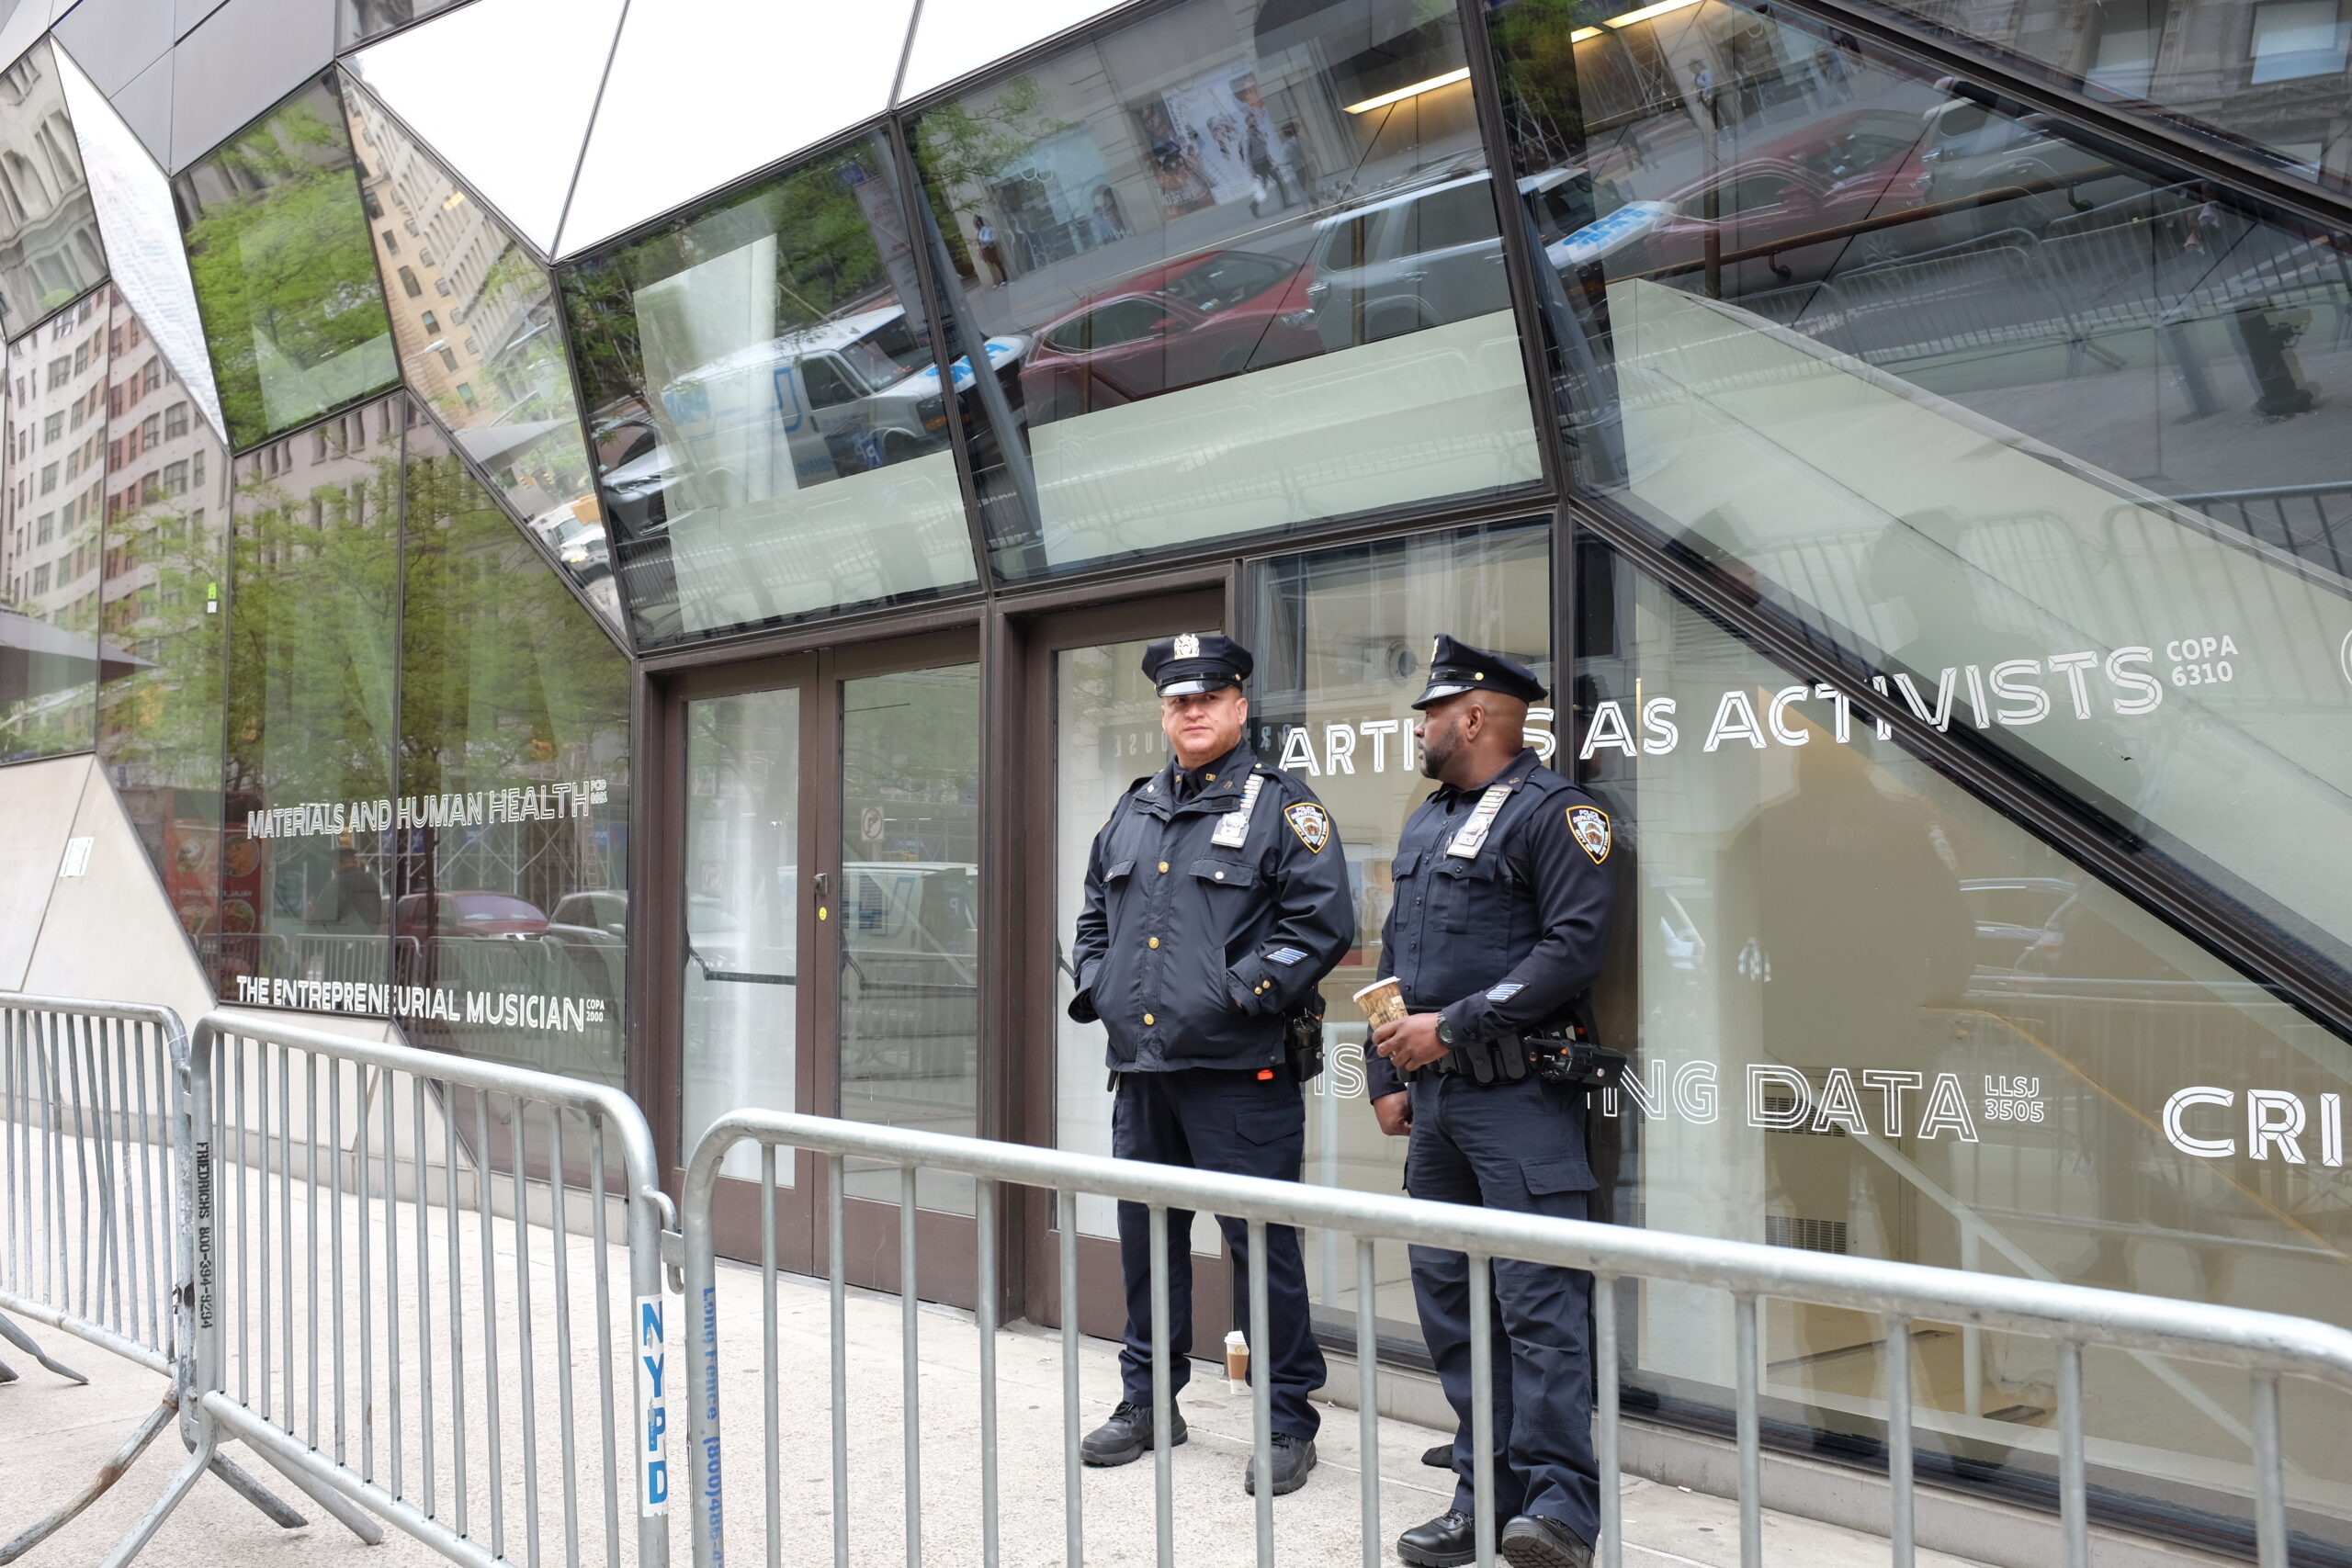 NYPD officers stand outside of University Center behind a barricade